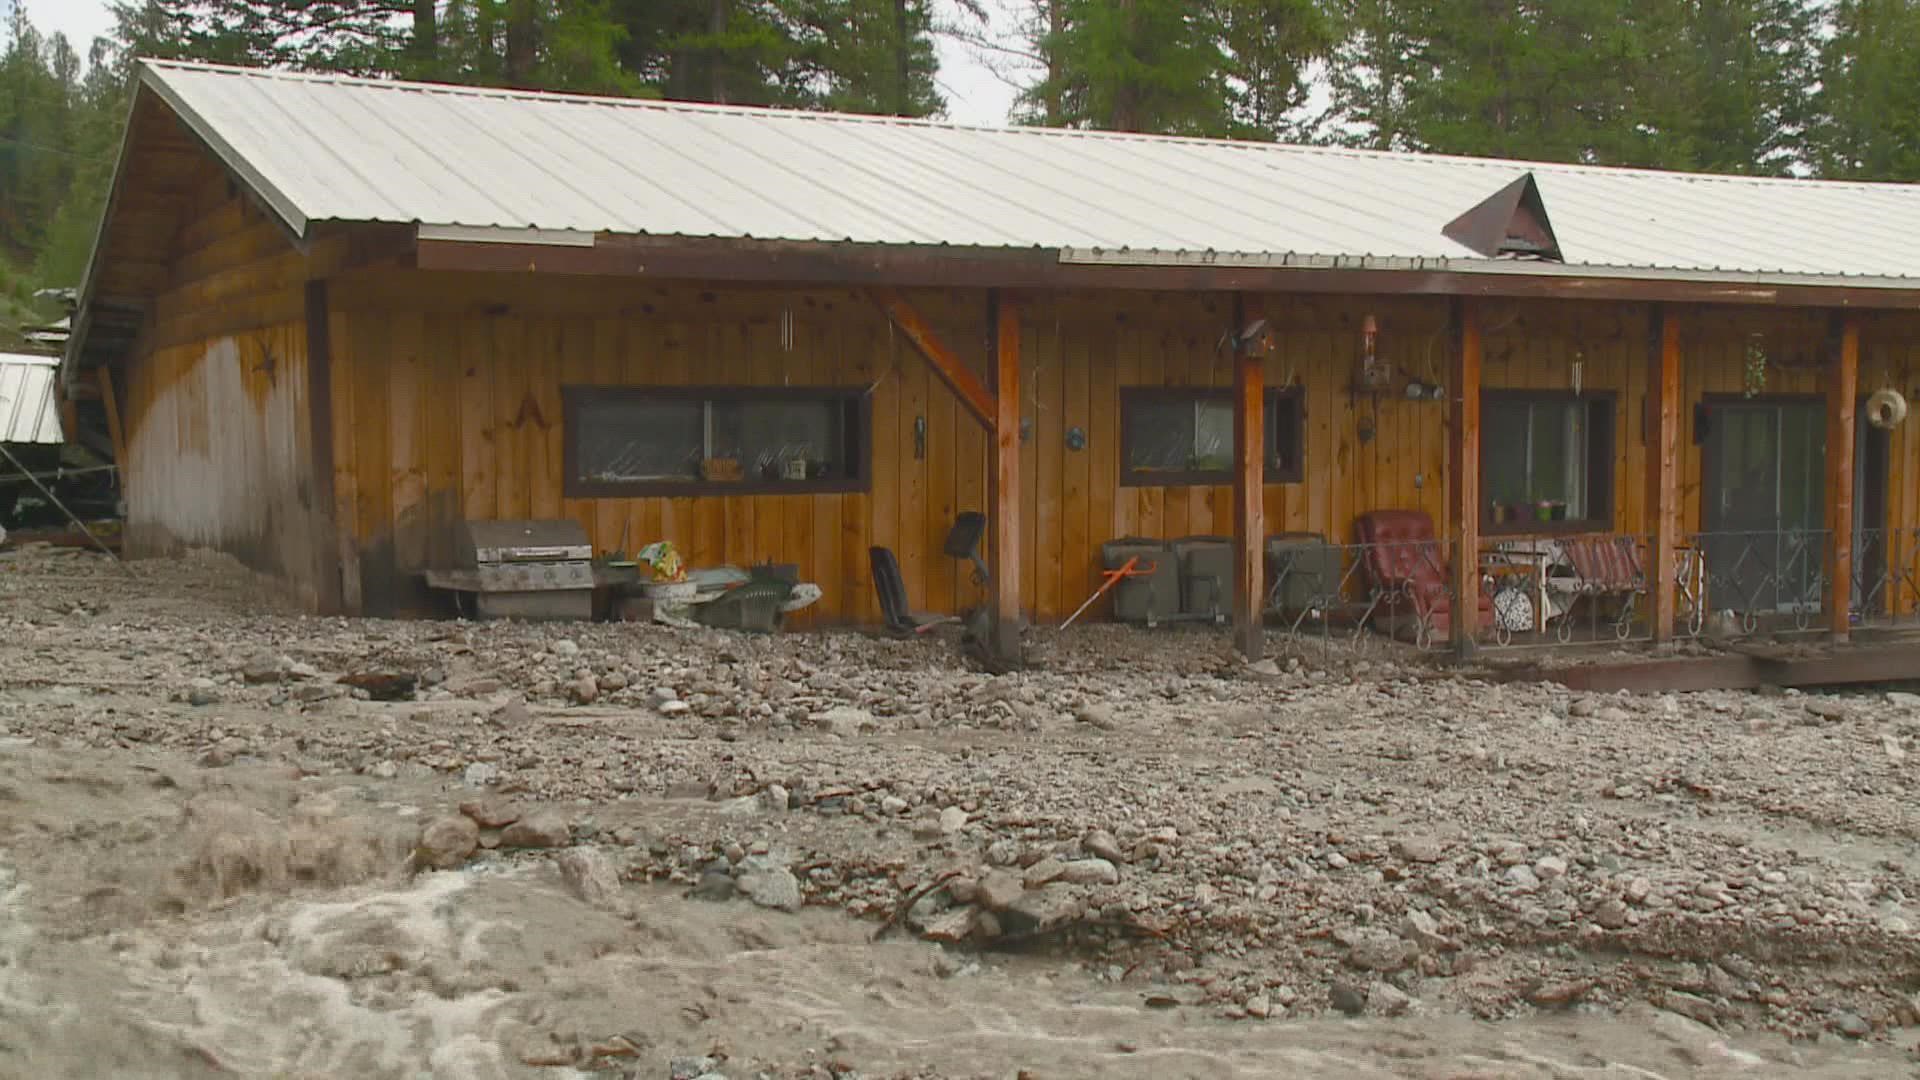 Emergency management says the mudslide happened in a burn scar area as it came down through Lightning Creek. Two houses were damaged in the mudslide.